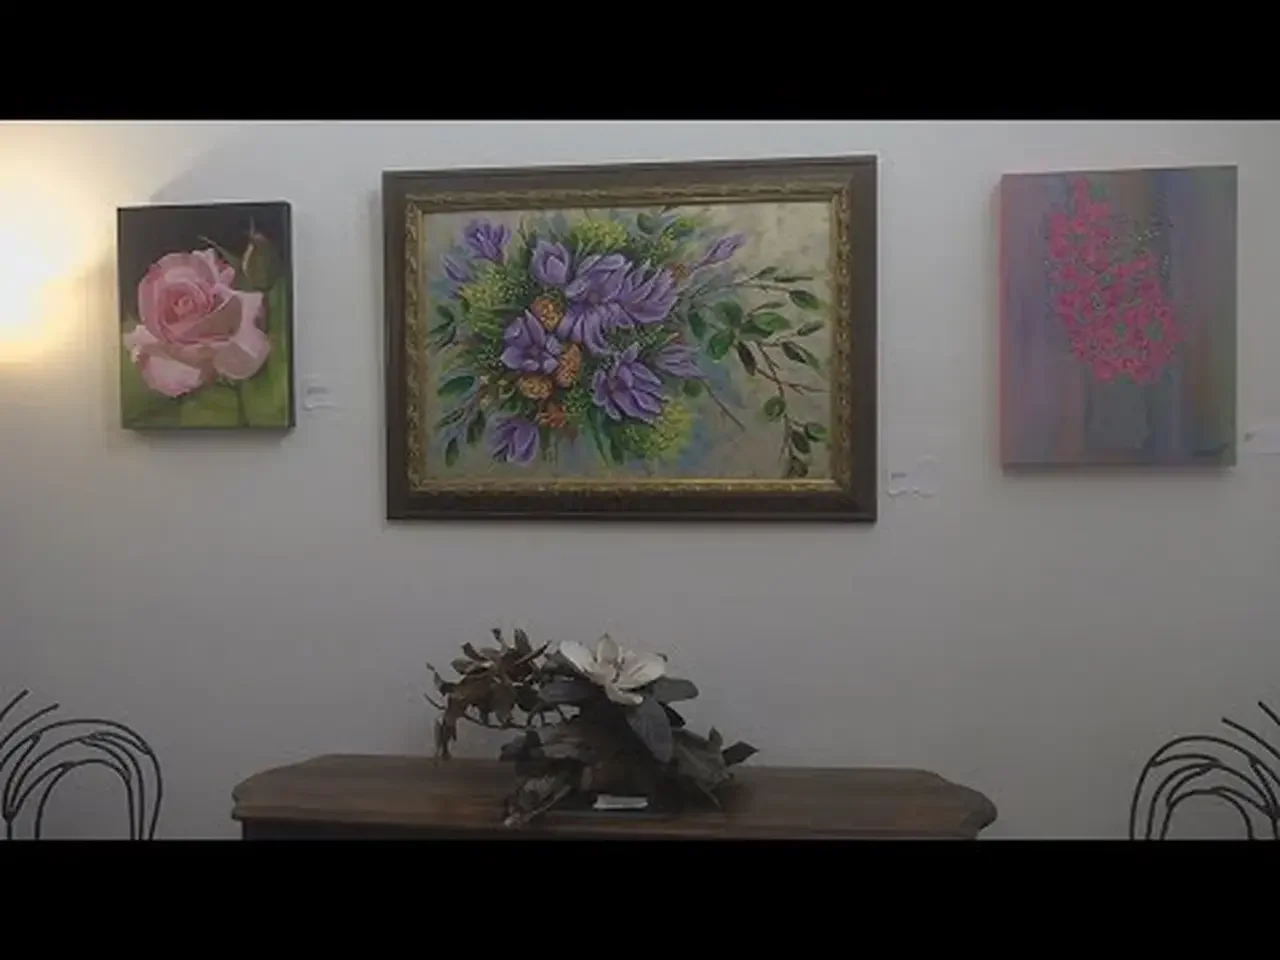 The Art Museum of Southeast Texas to host ‘The Art of Flowers’ free event Thursday